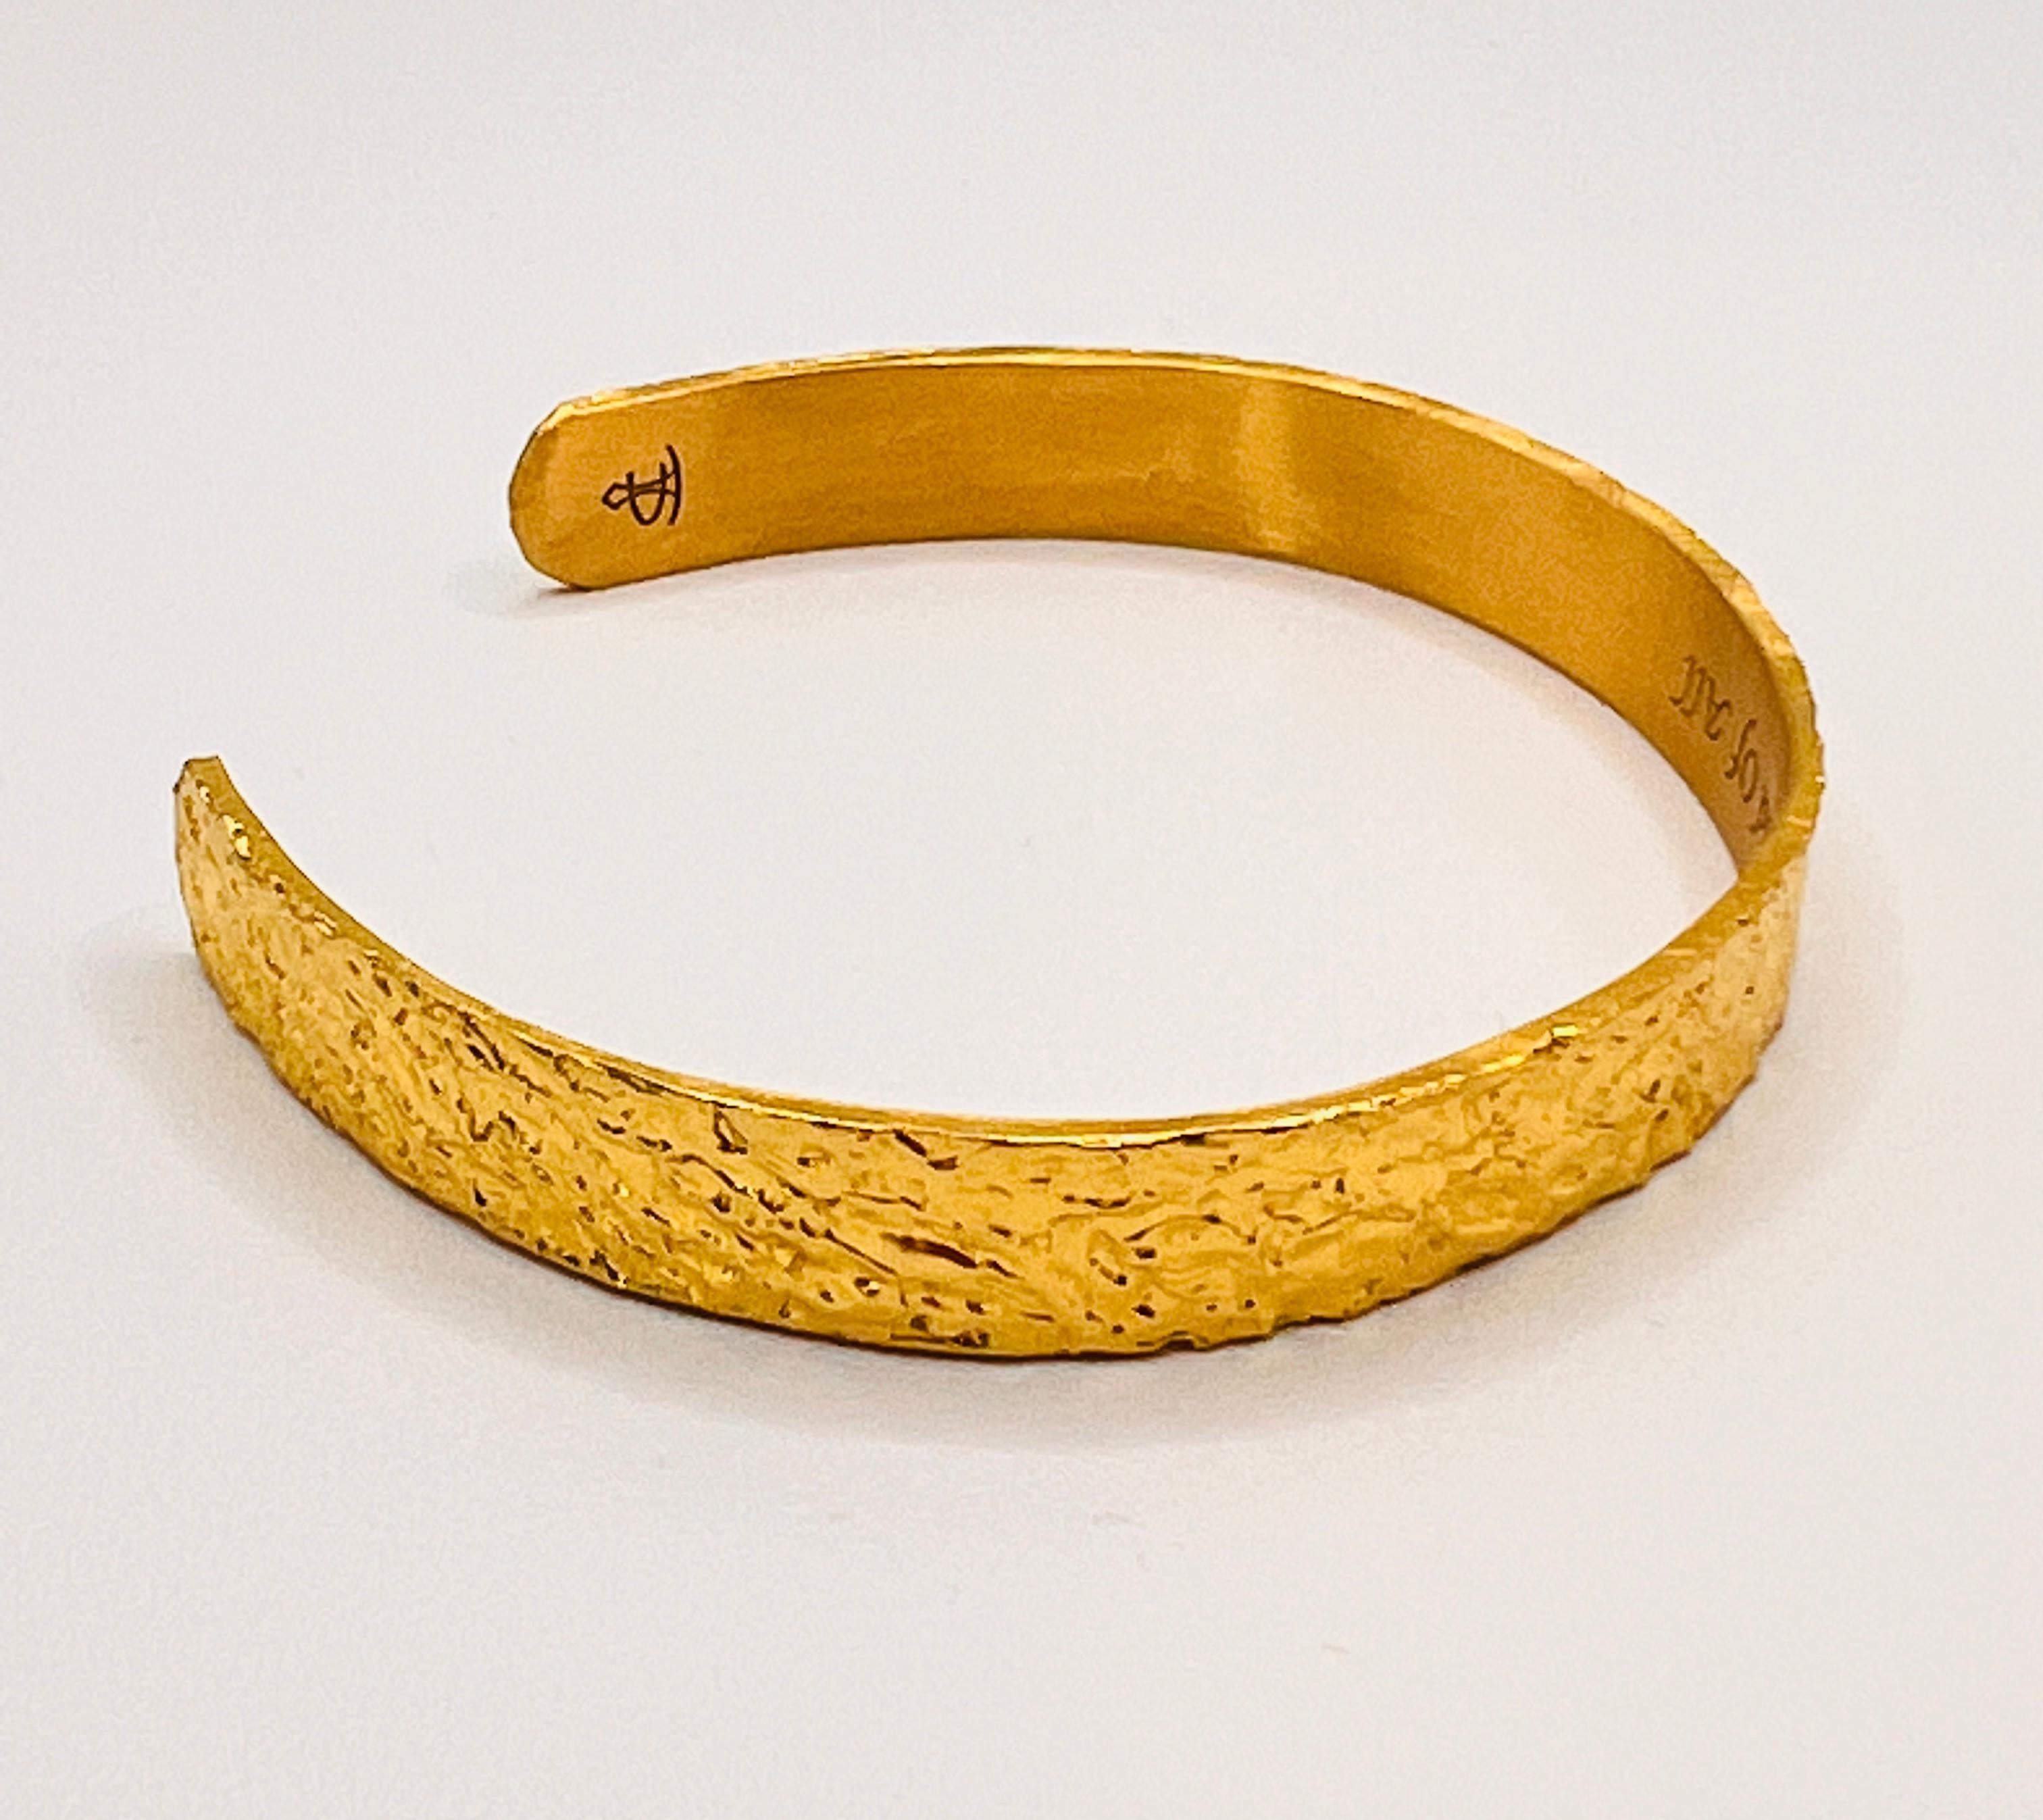 20k Gold Customized Engraved Cuff, by Tagili For Sale 3